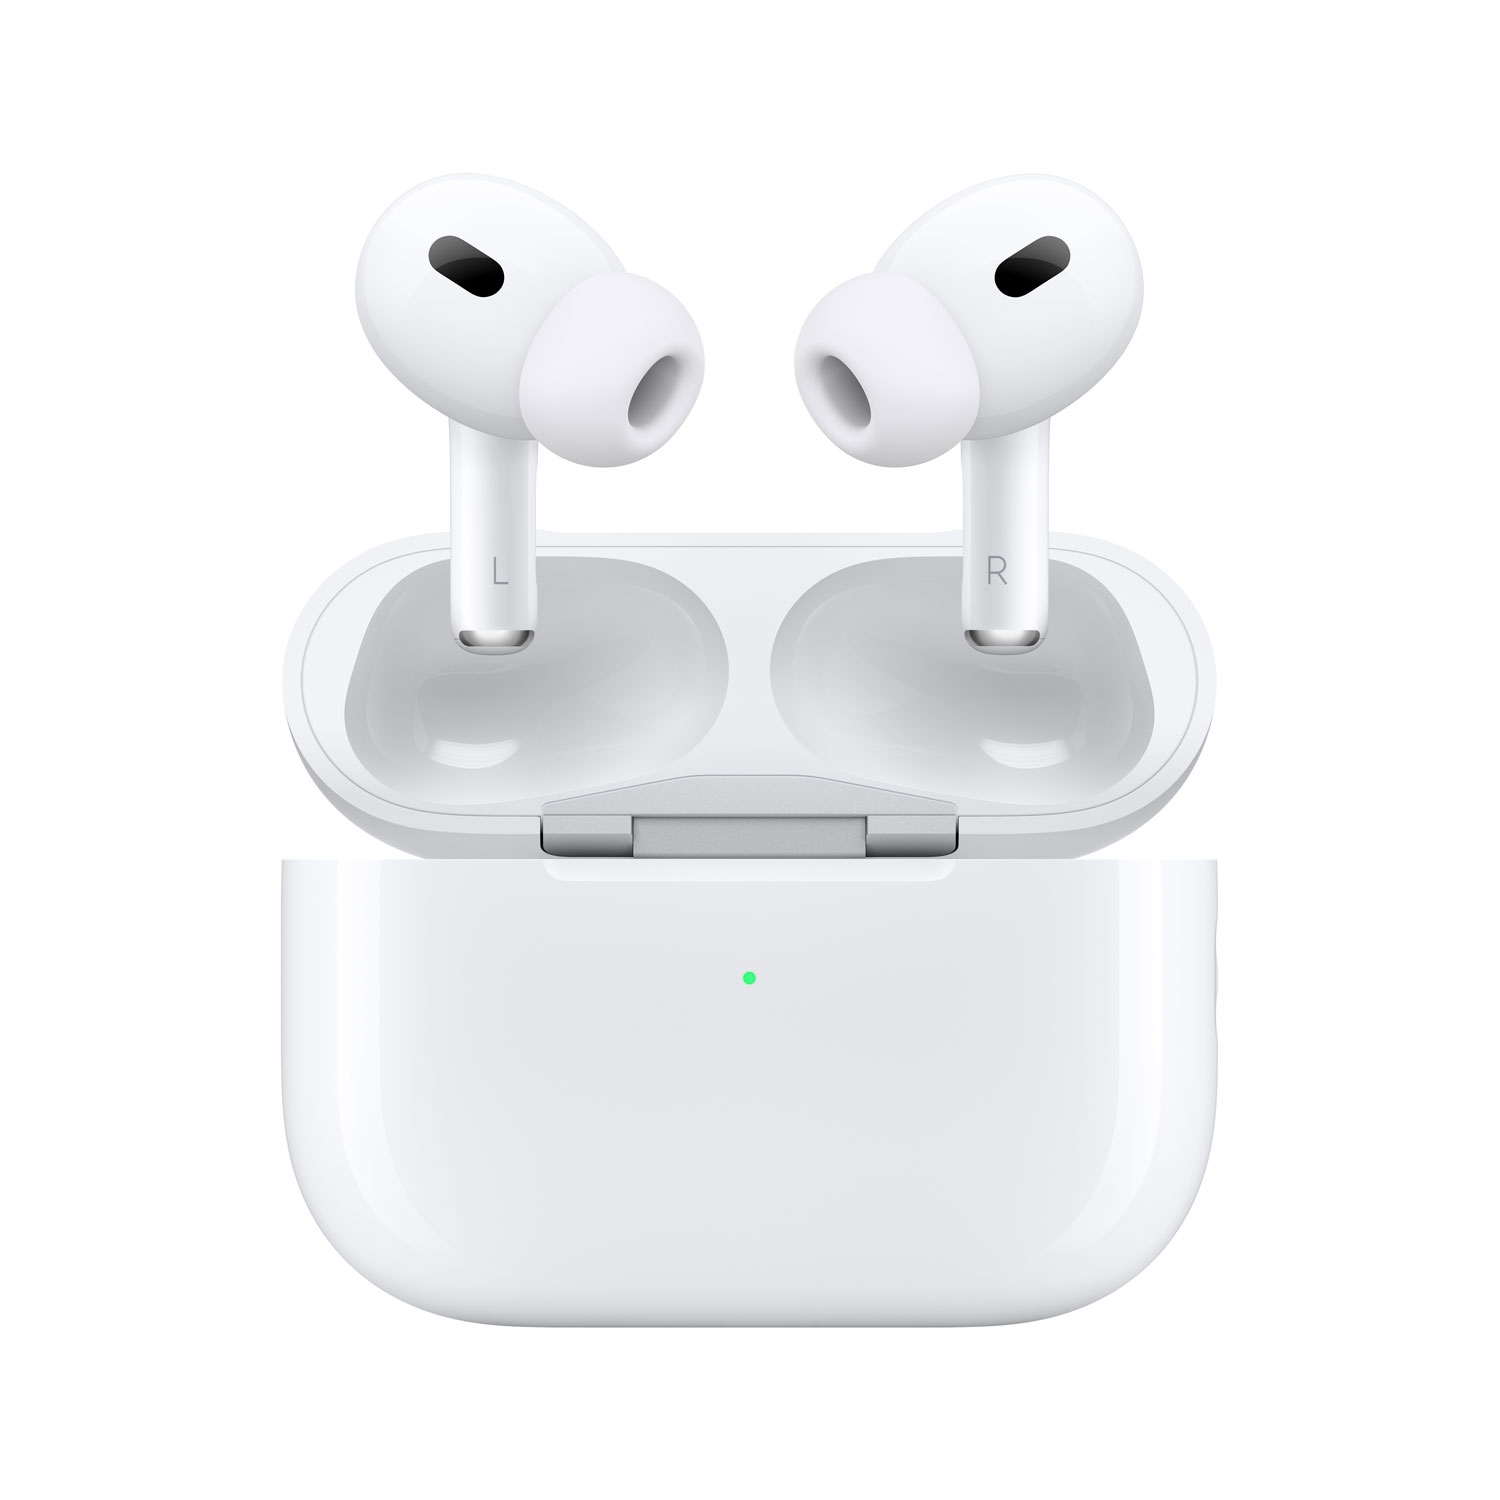 Open Box - Apple AirPods Pro (2nd generation) Noise Cancelling True Wireless Earbuds with USB-C MagSafe Charging Case (10/10 Condition - Unused Product )